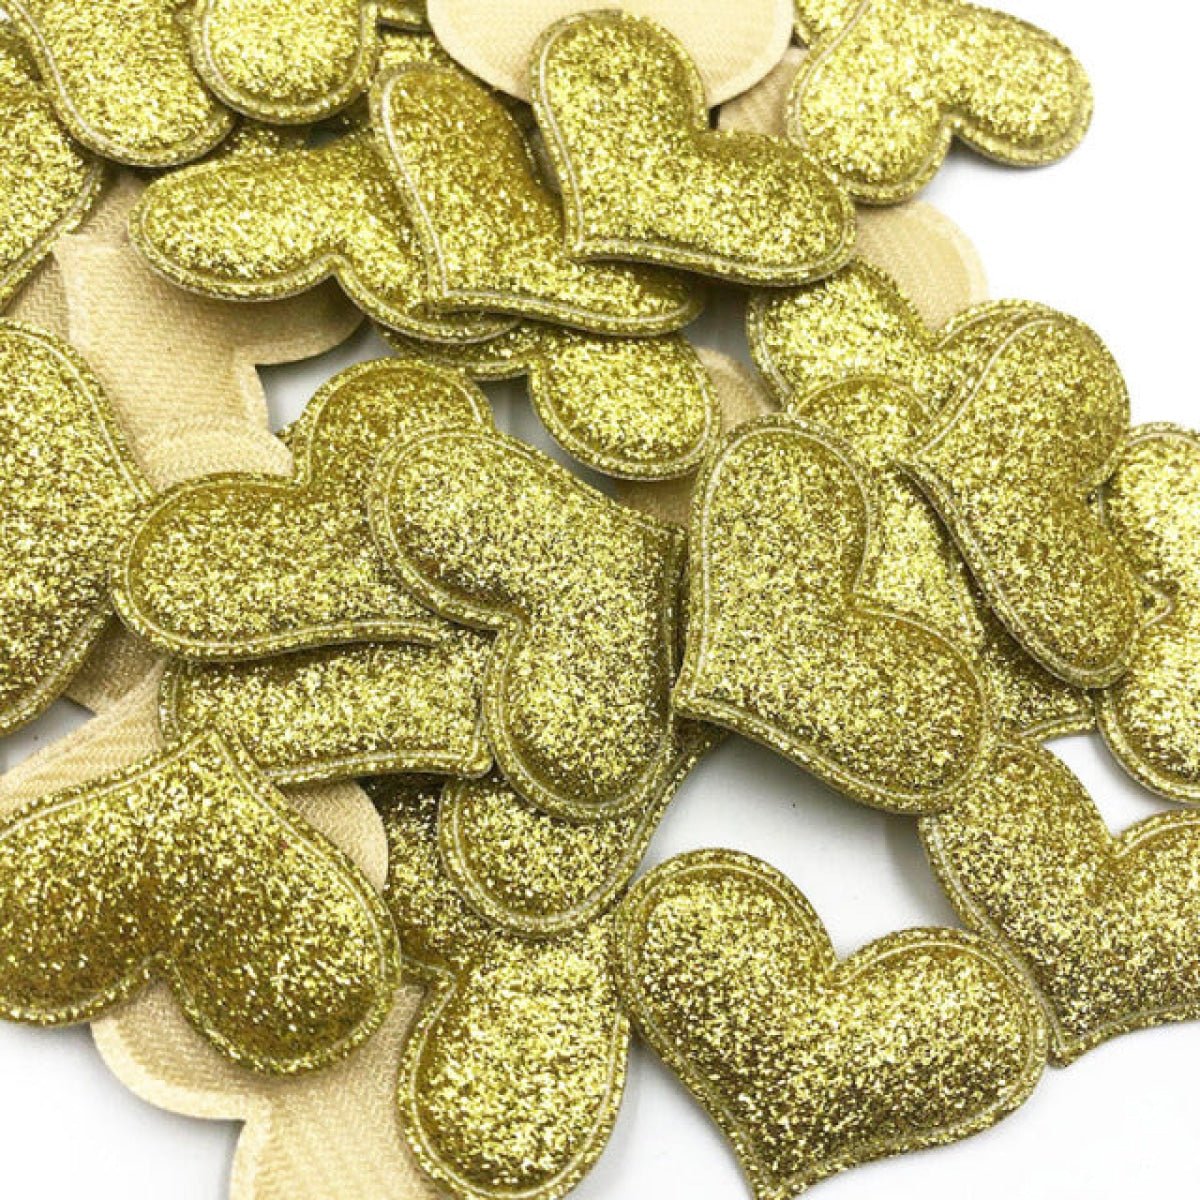 50pcs 35mmx30mm Glitter Padded Heart Felt Patches Appliques For Clothing Sewing DIY Wedding Decoration Toy Craft Shapes PU Leather - Gold - - Asia Sell